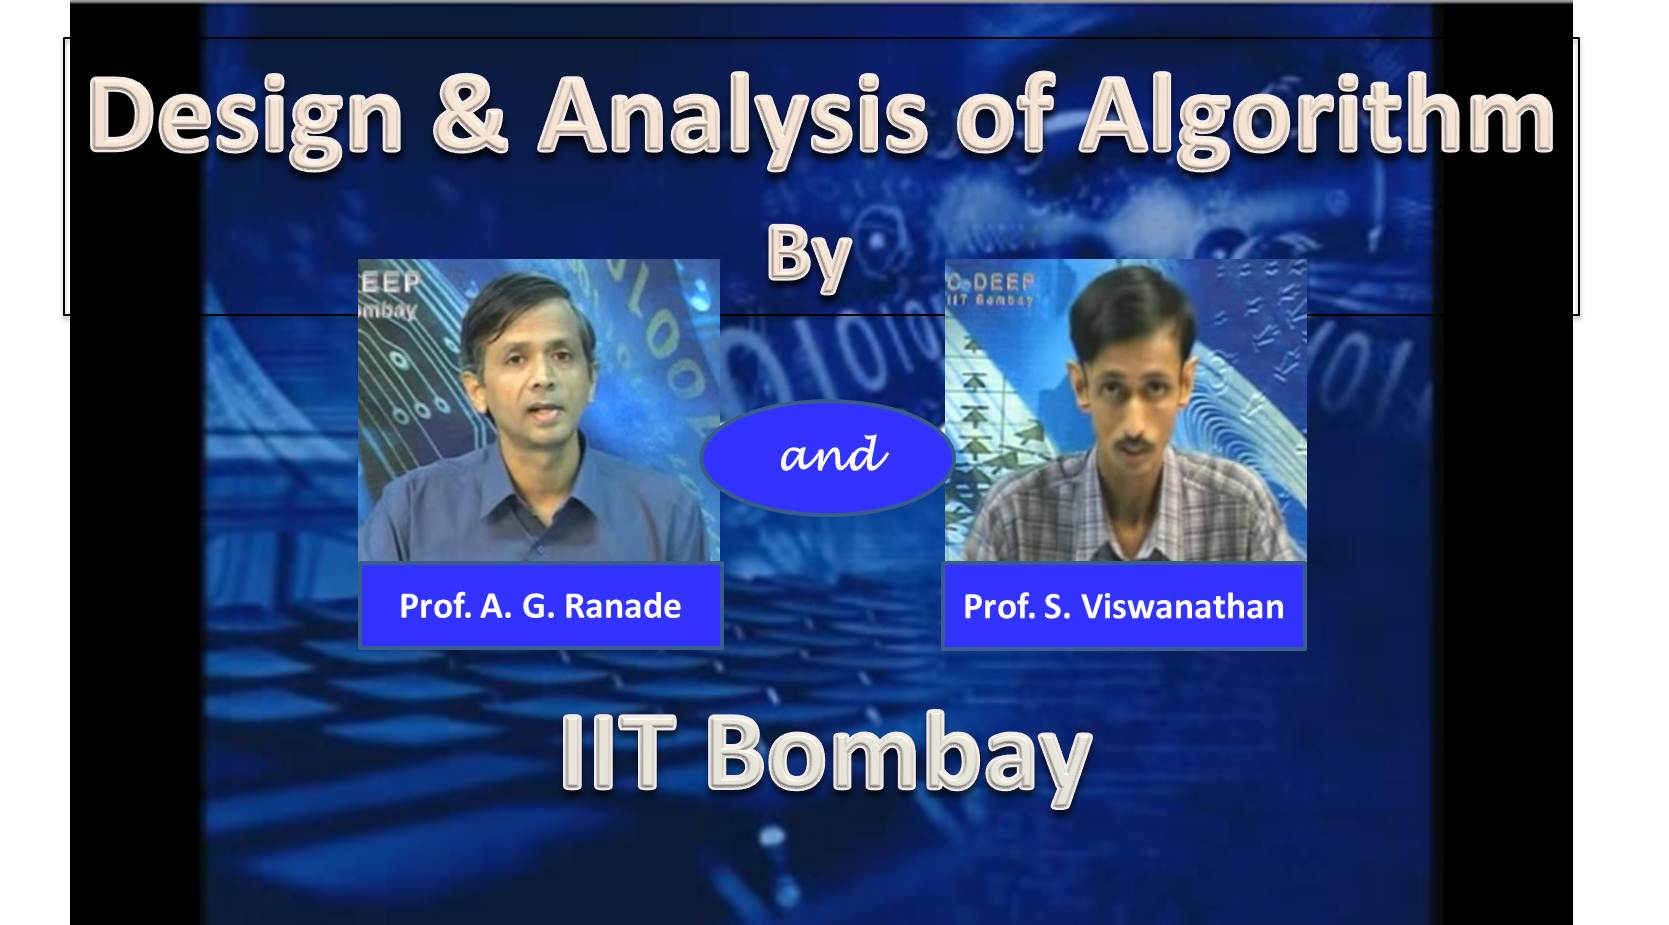 http://study.aisectonline.com/images/SubCategory/Video Lecture Series on Design & Analysis of Algorithms by Prof.Abhiram Ranade and Prof. S. Viswanathan, IIT Bombay.jpg